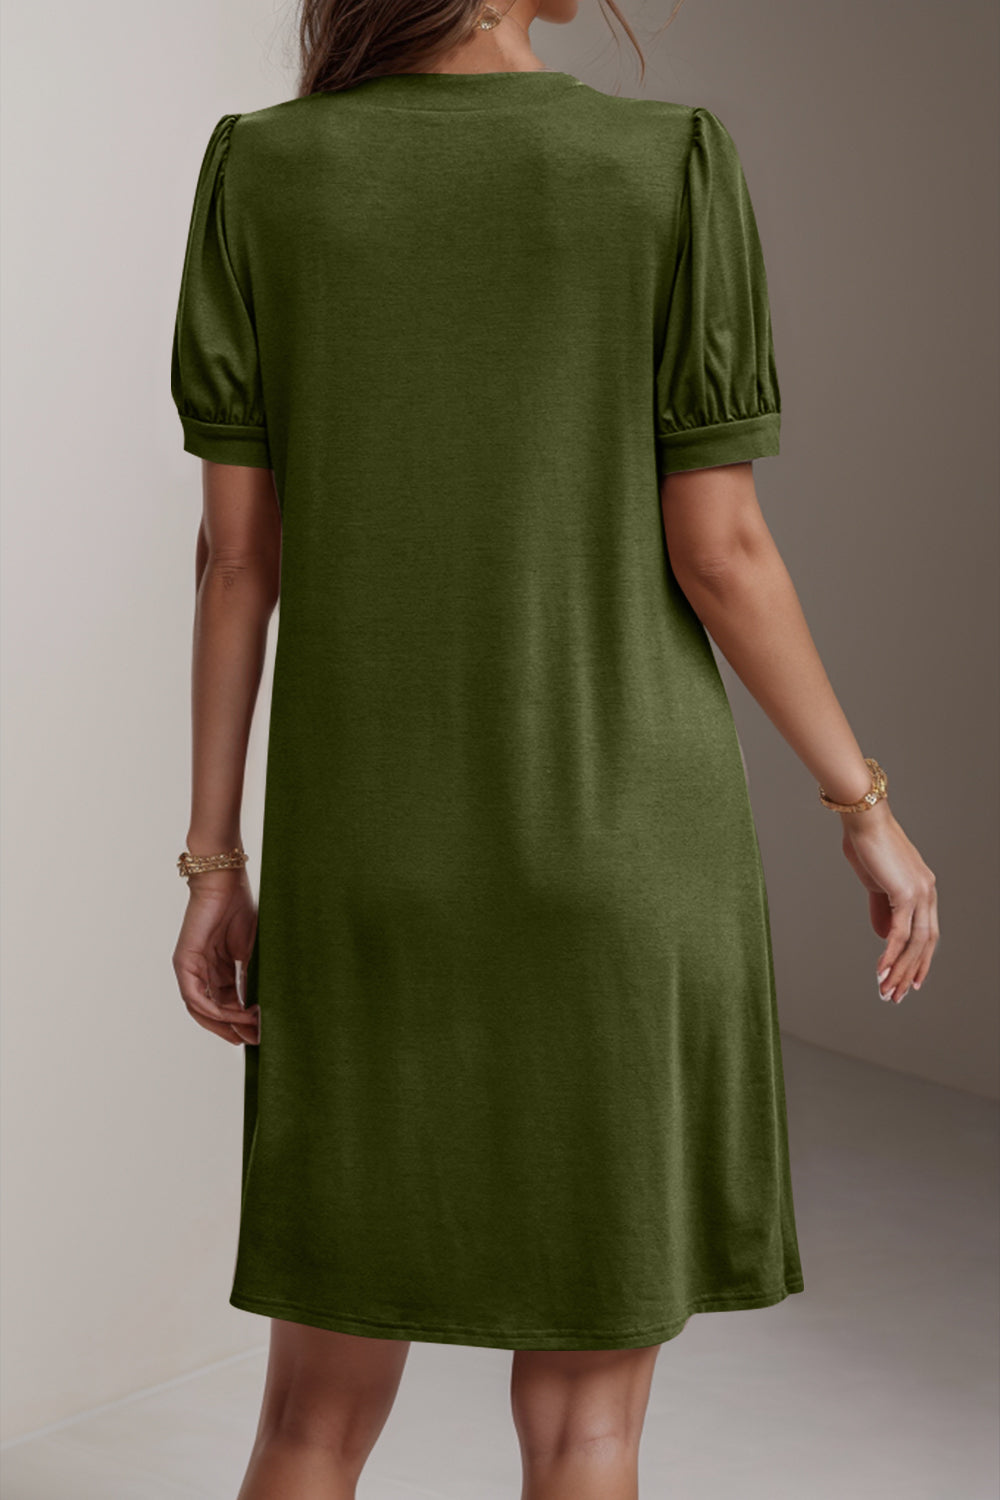 Chic Pin-Tuck Dress in army green/black, with a flattering fit & versatile design for all occasions. Comfort meets elegance in your new favorite.